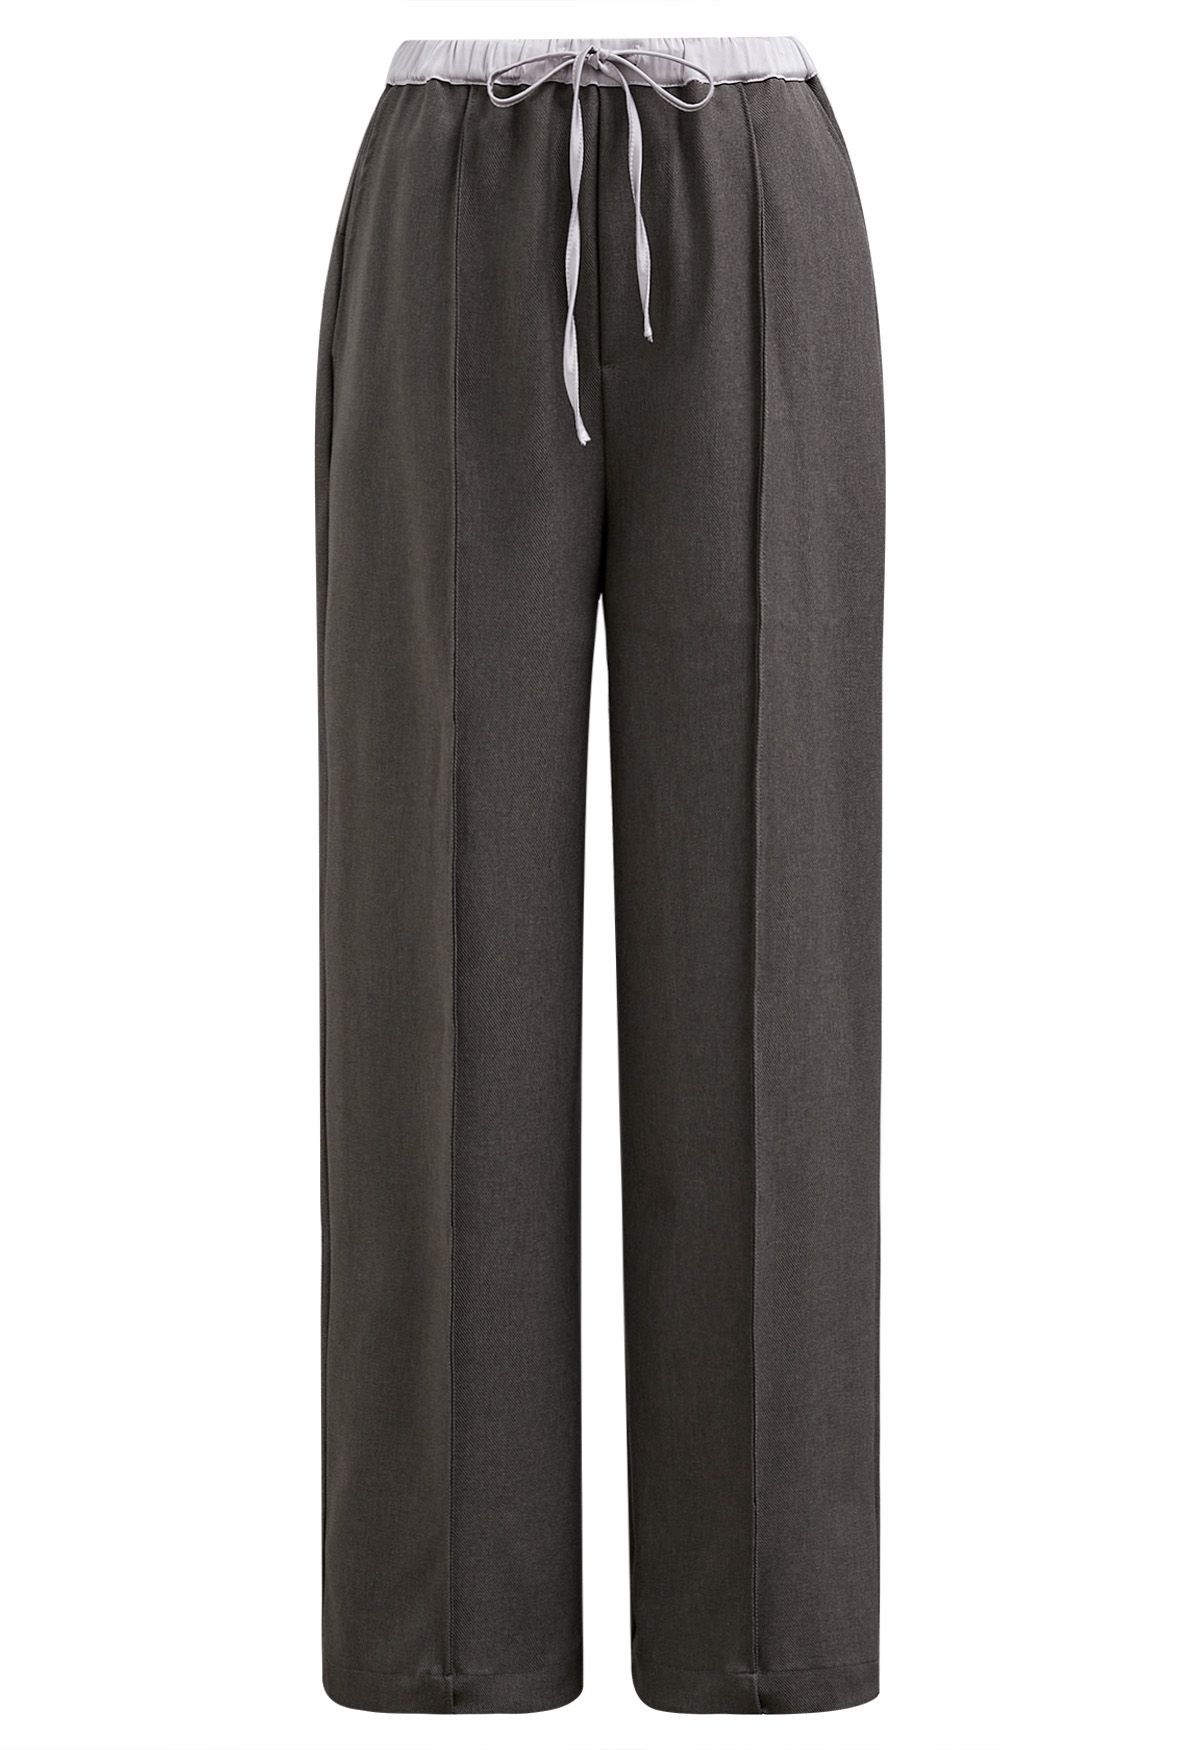 Contrast Waist Seam Detail Straight-Leg Pants in Taupe